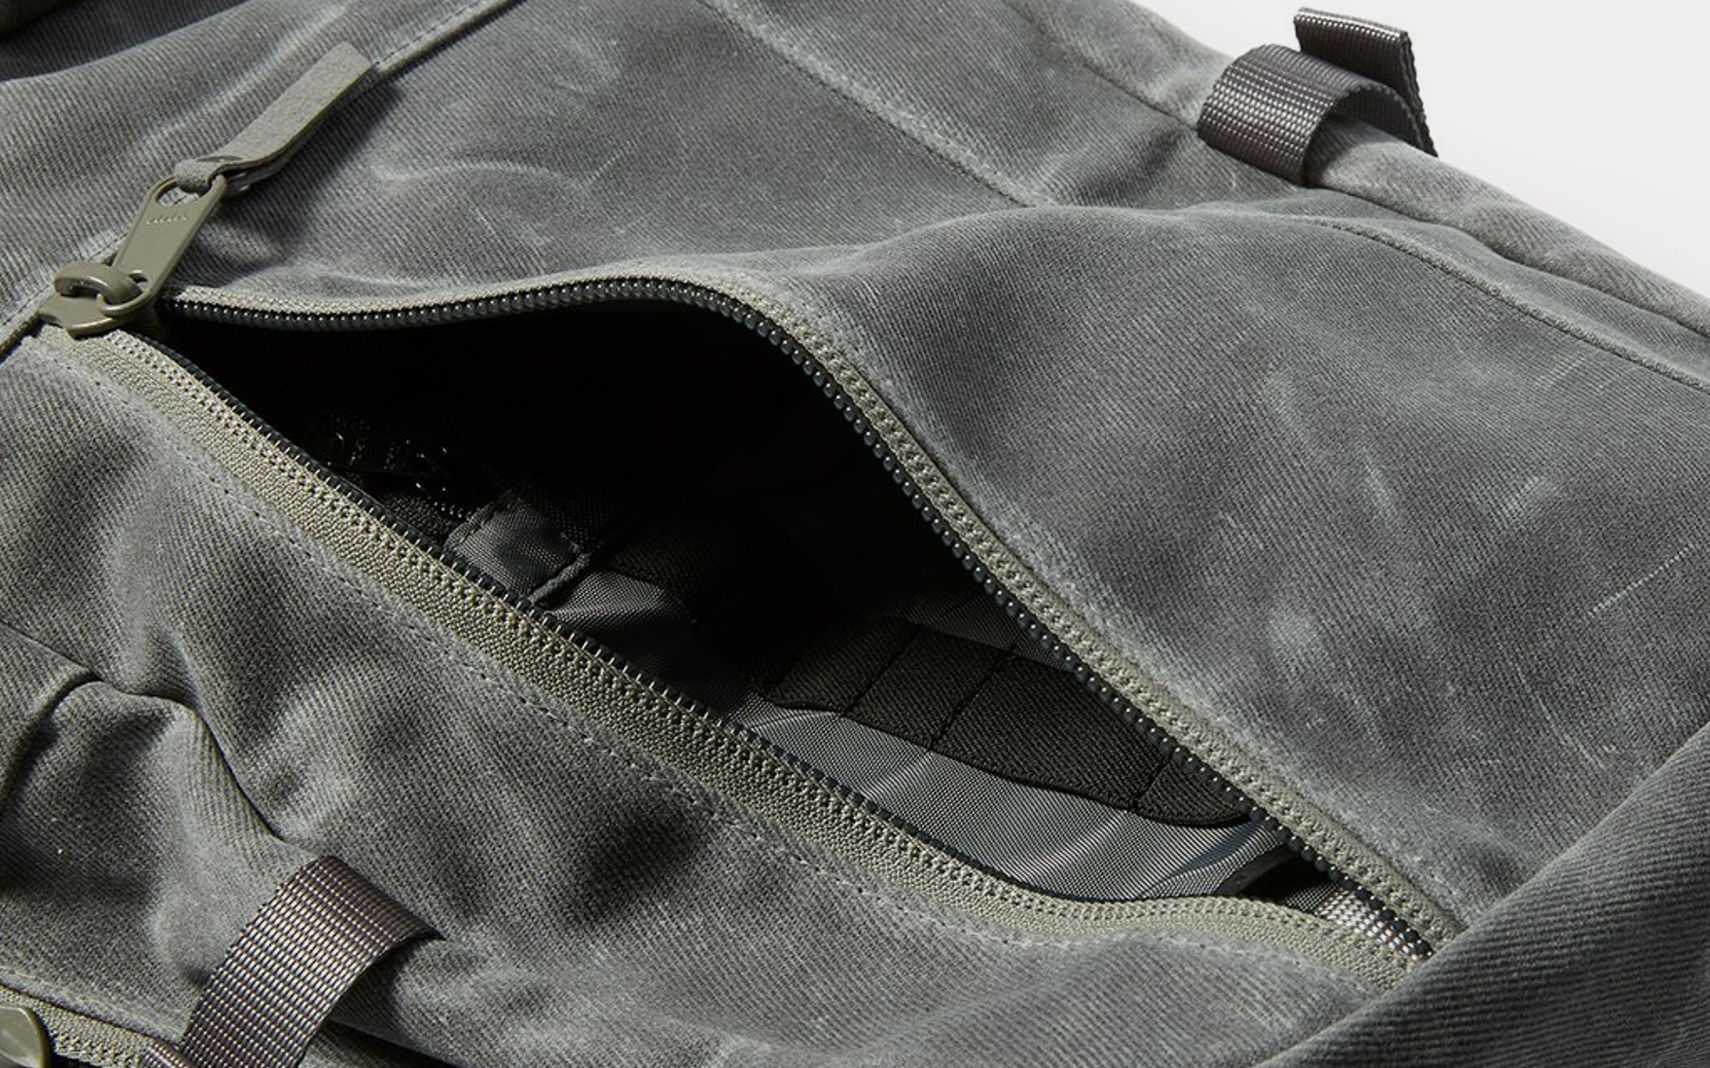 DayPack 3Sixteen Special Edition Backpack